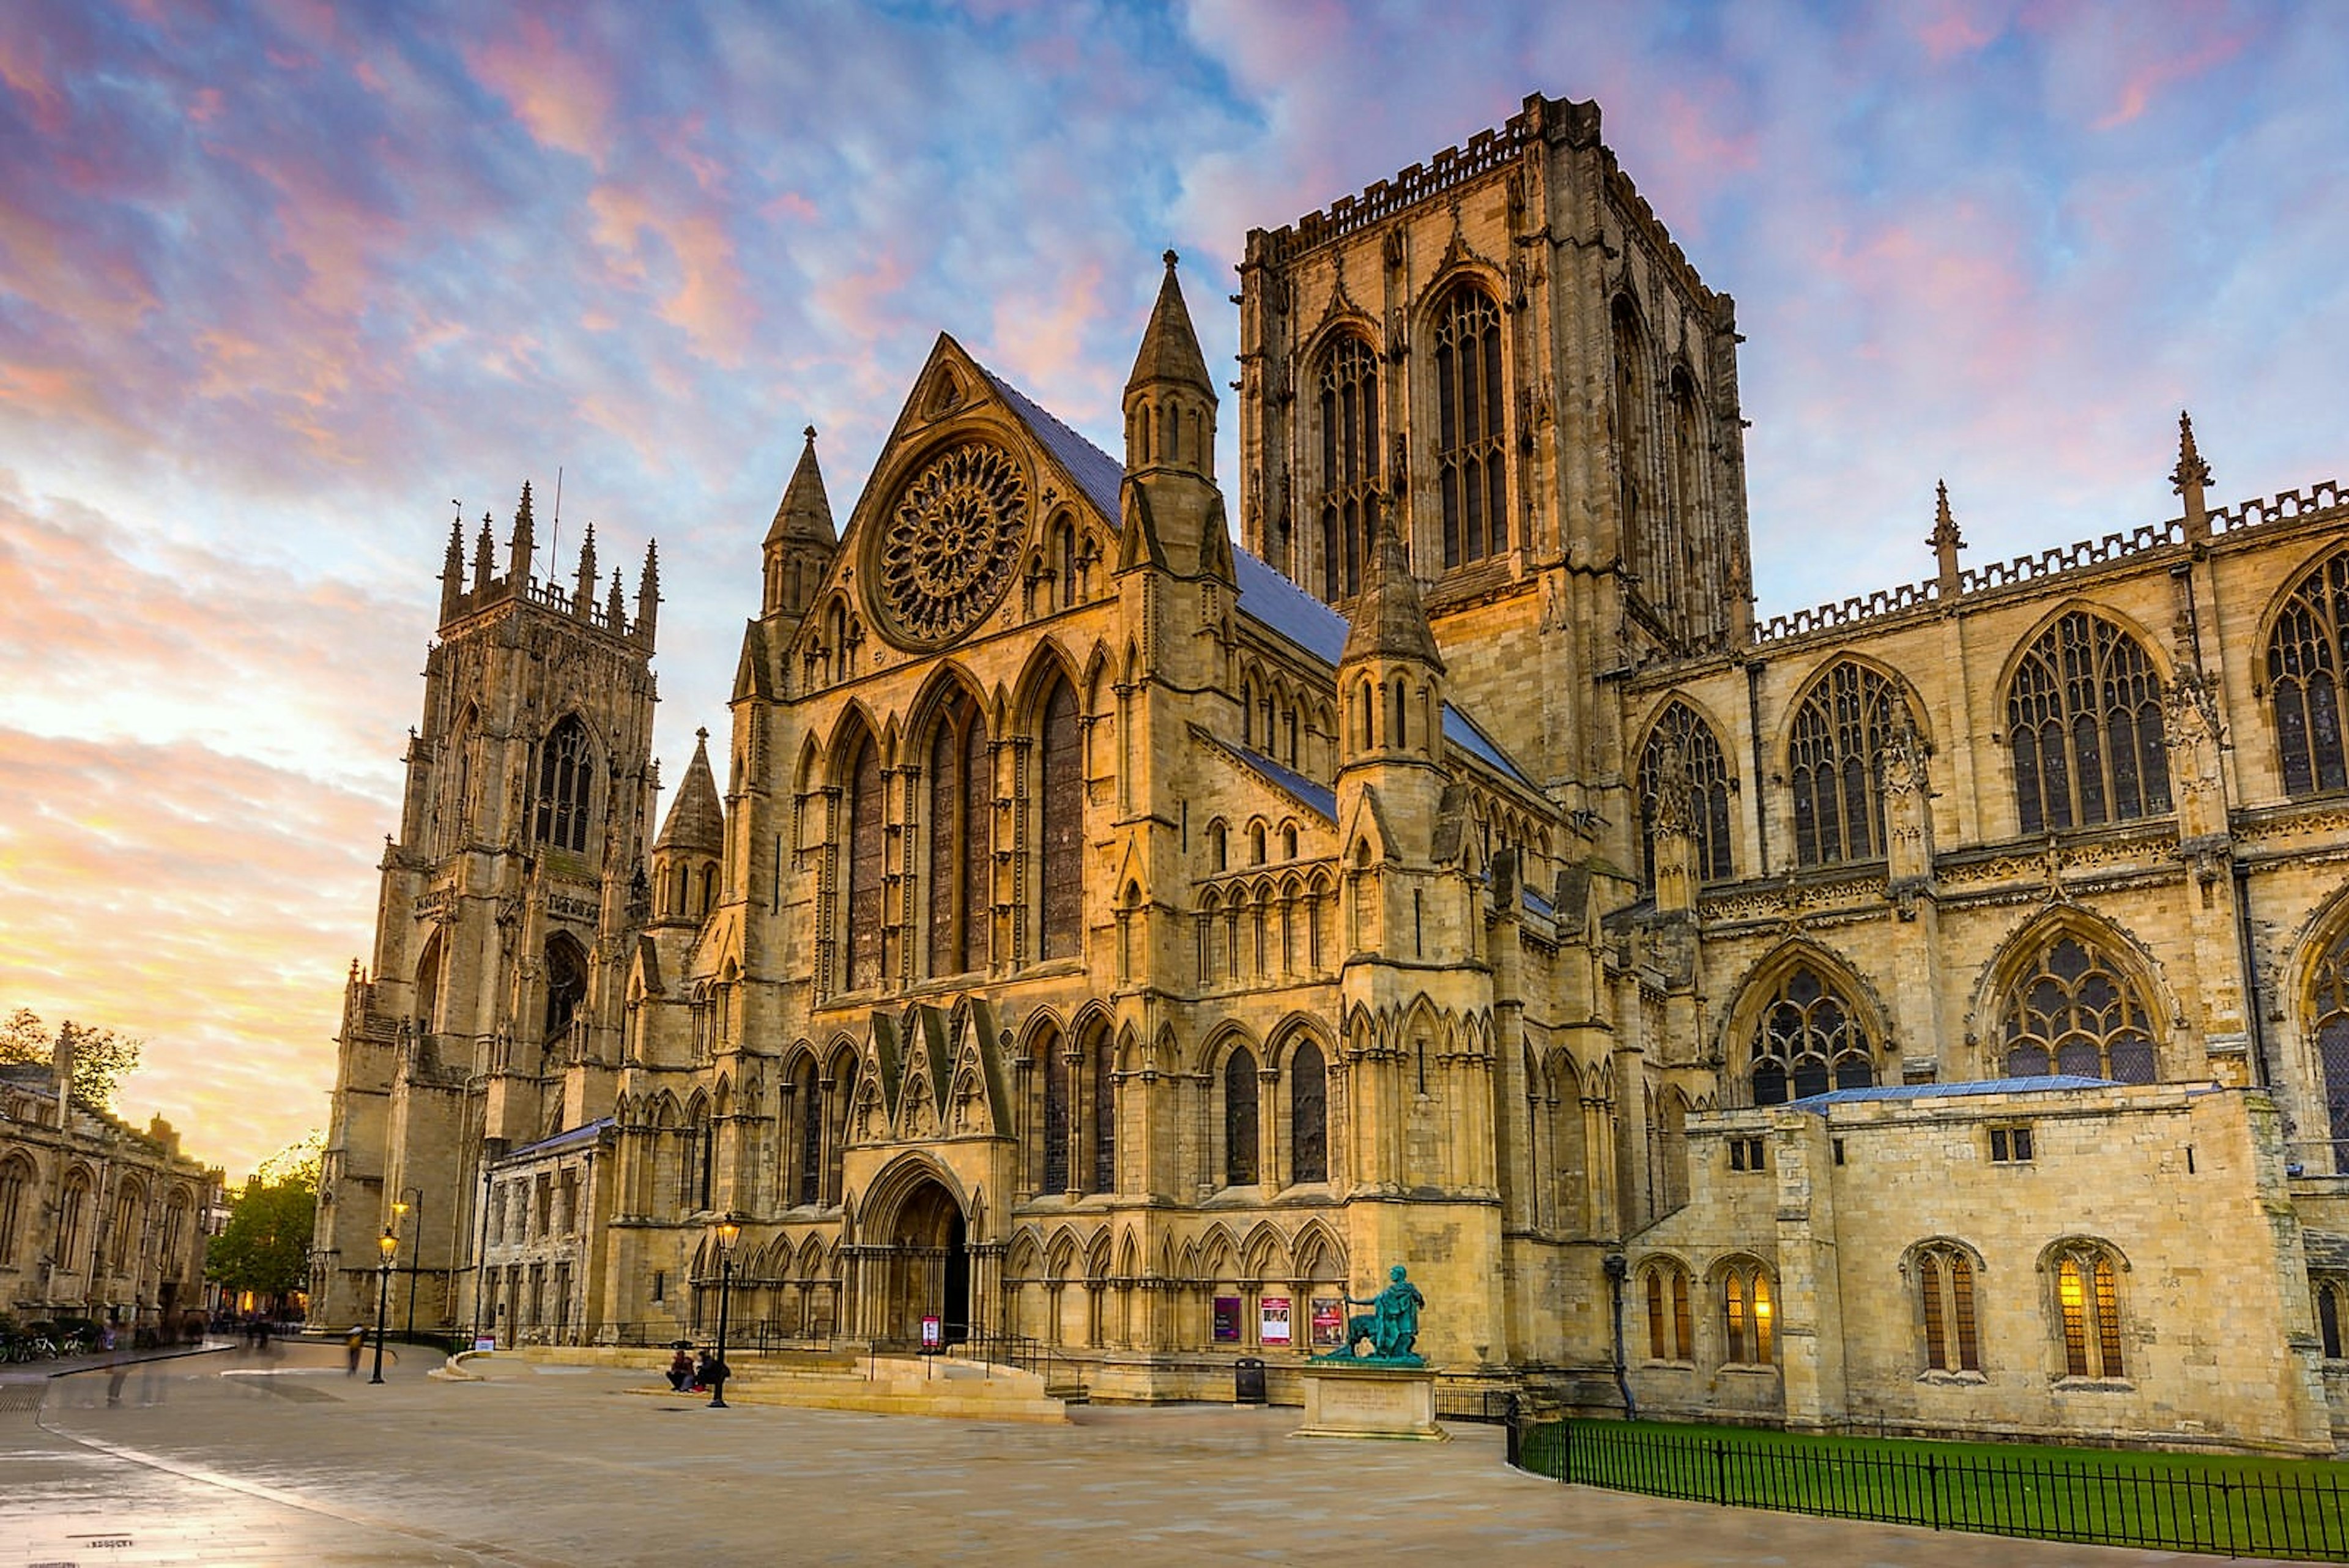 York Minster is one of the county's most famous landmarks but there are many other architectural wonders to visit too © Chris Hepburn / Getty Images